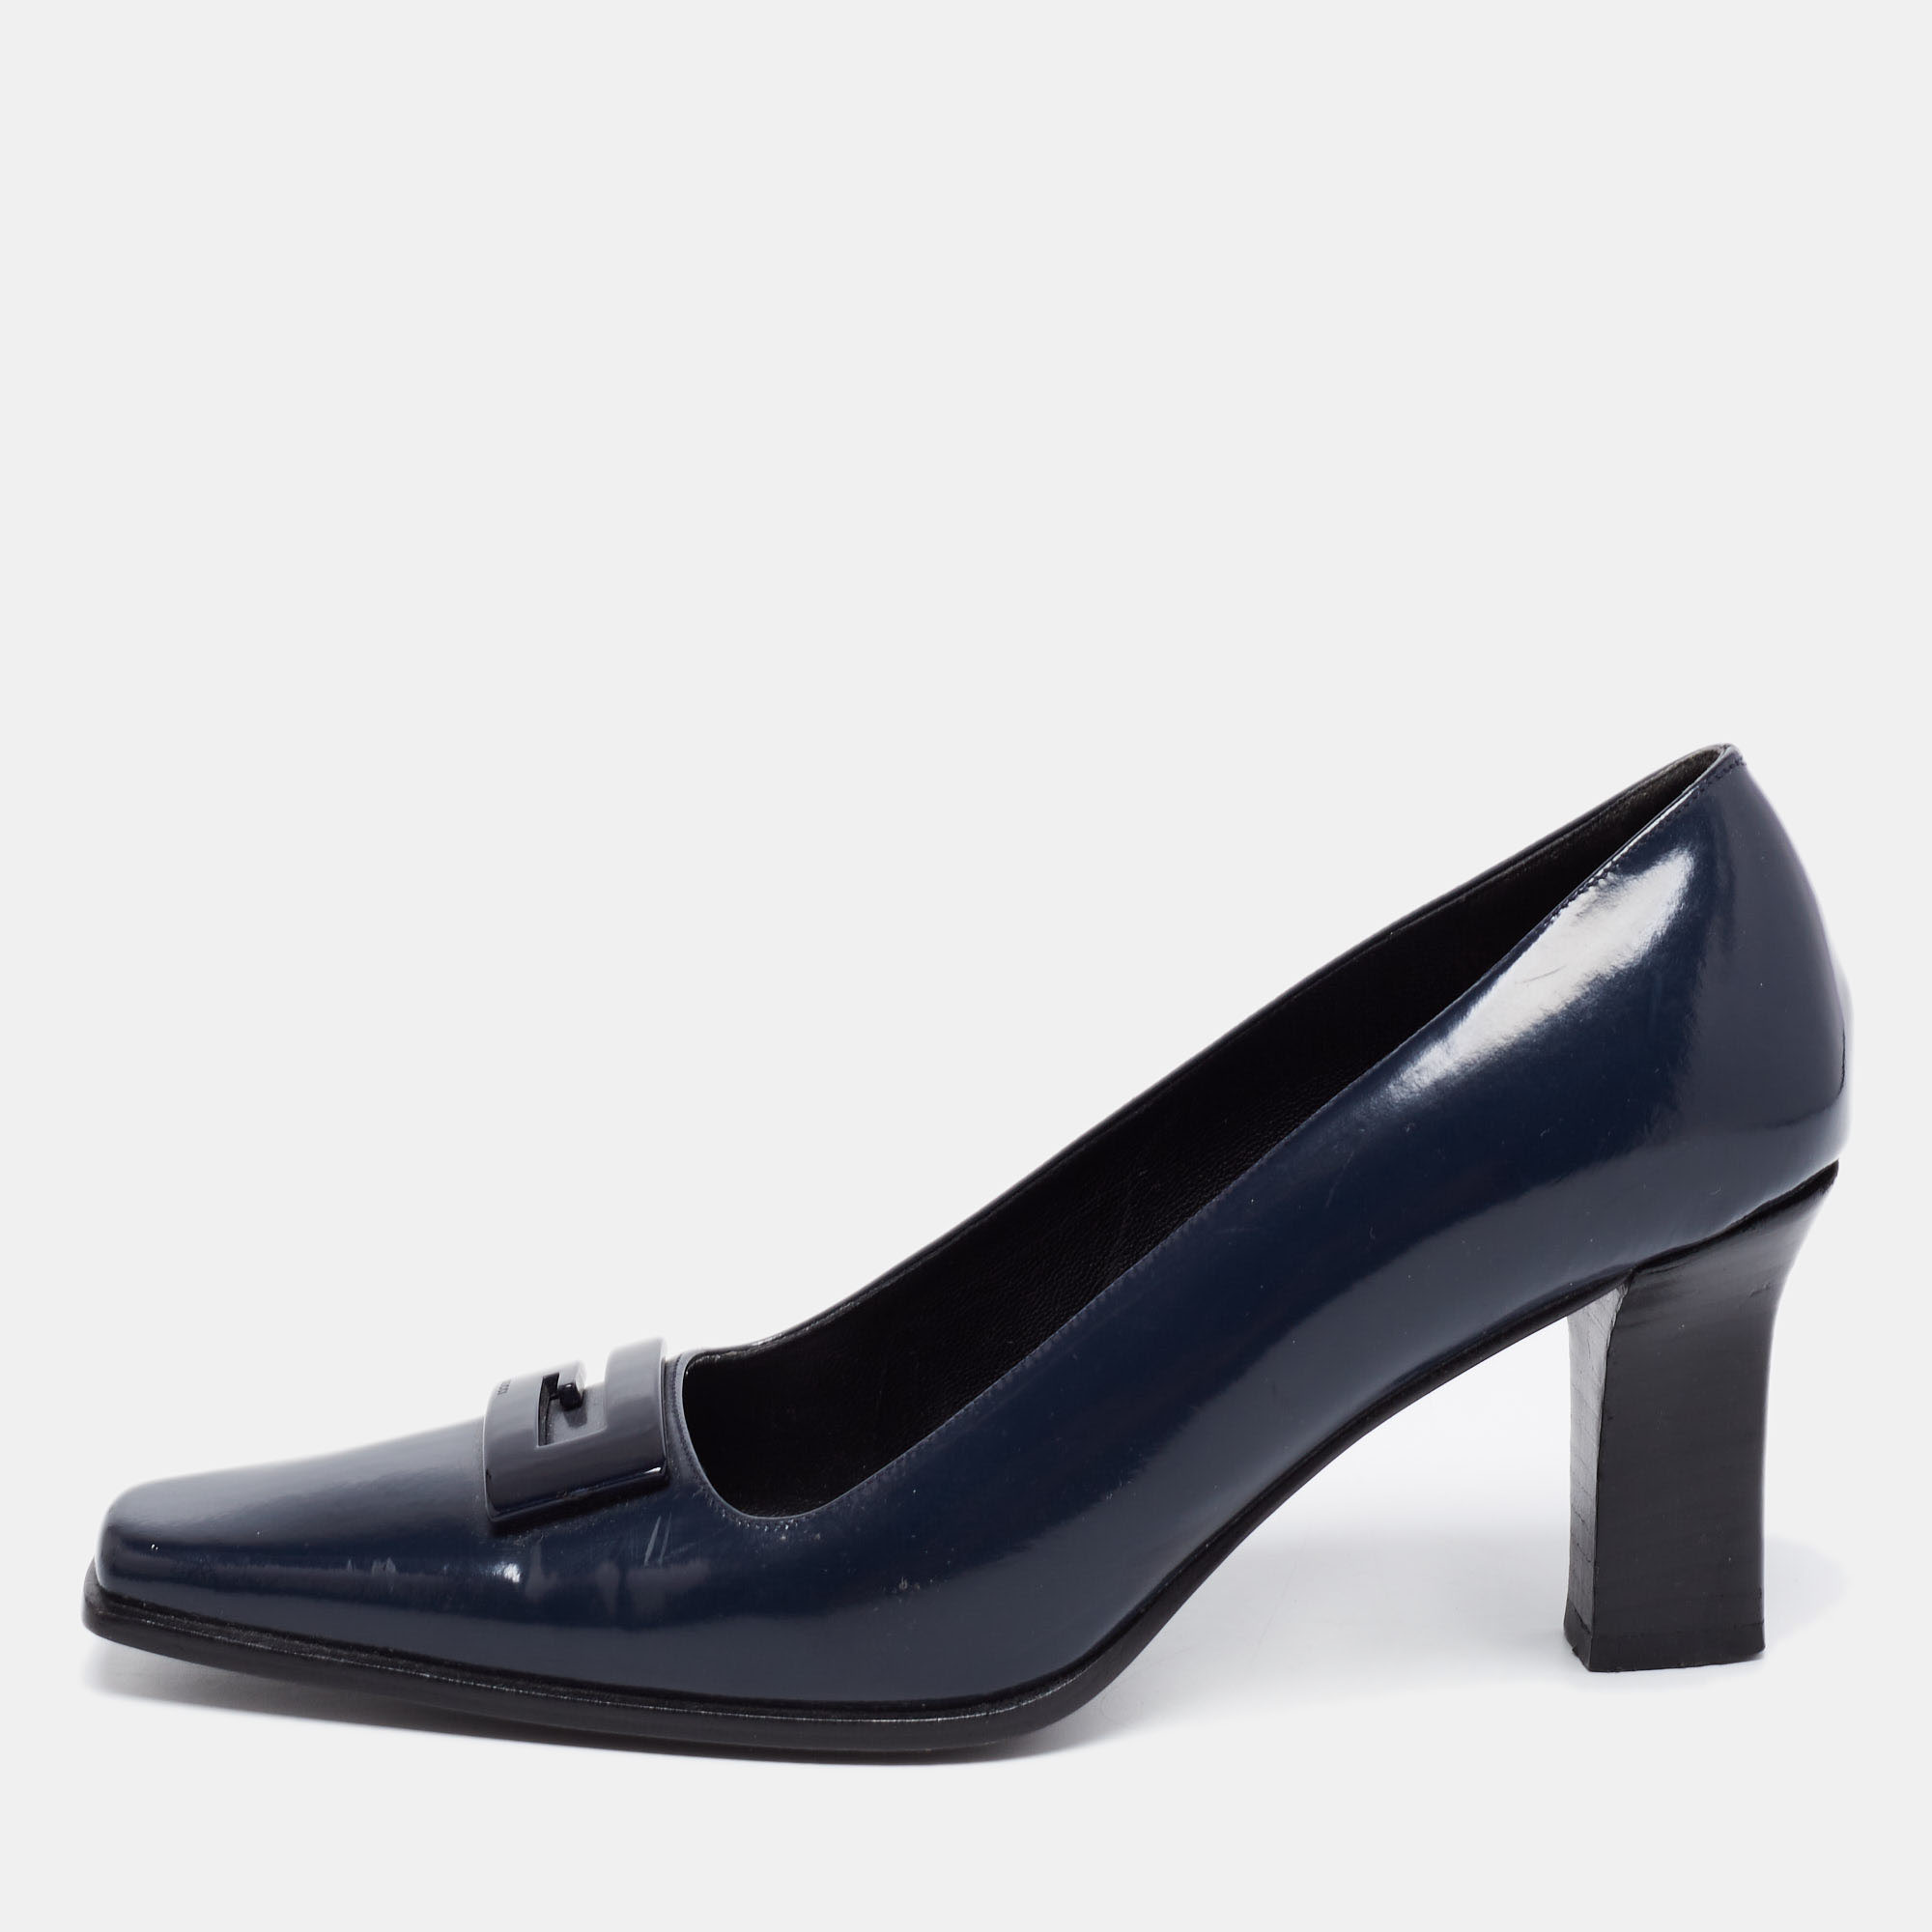 Gucci midnight blue patent leather square-toe pumps size 36.5